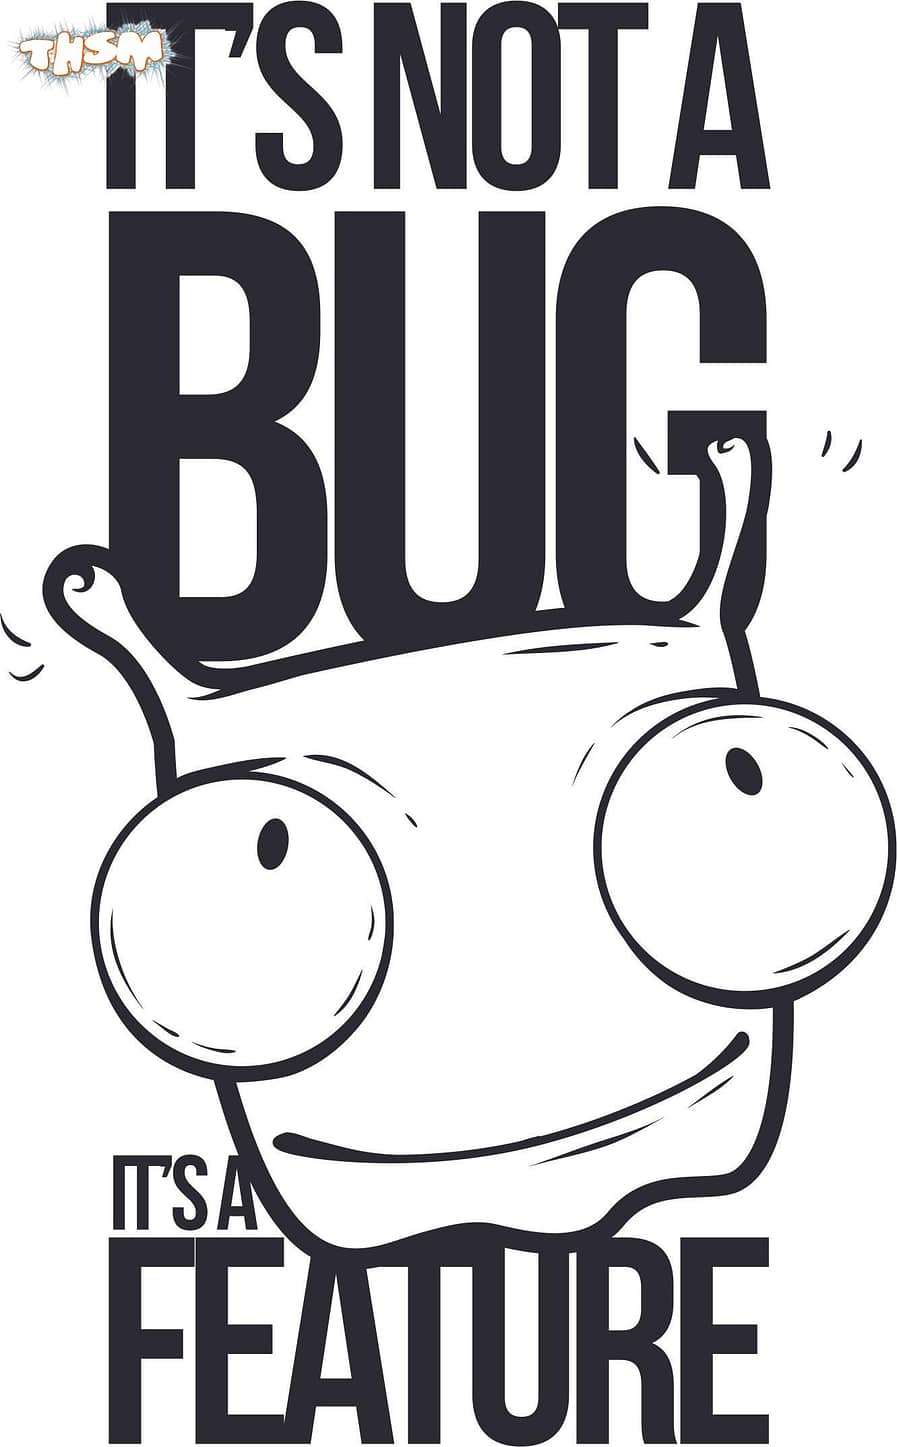 Not A Bug T Shirt Design Free Vector cdr Download - 3axis.co